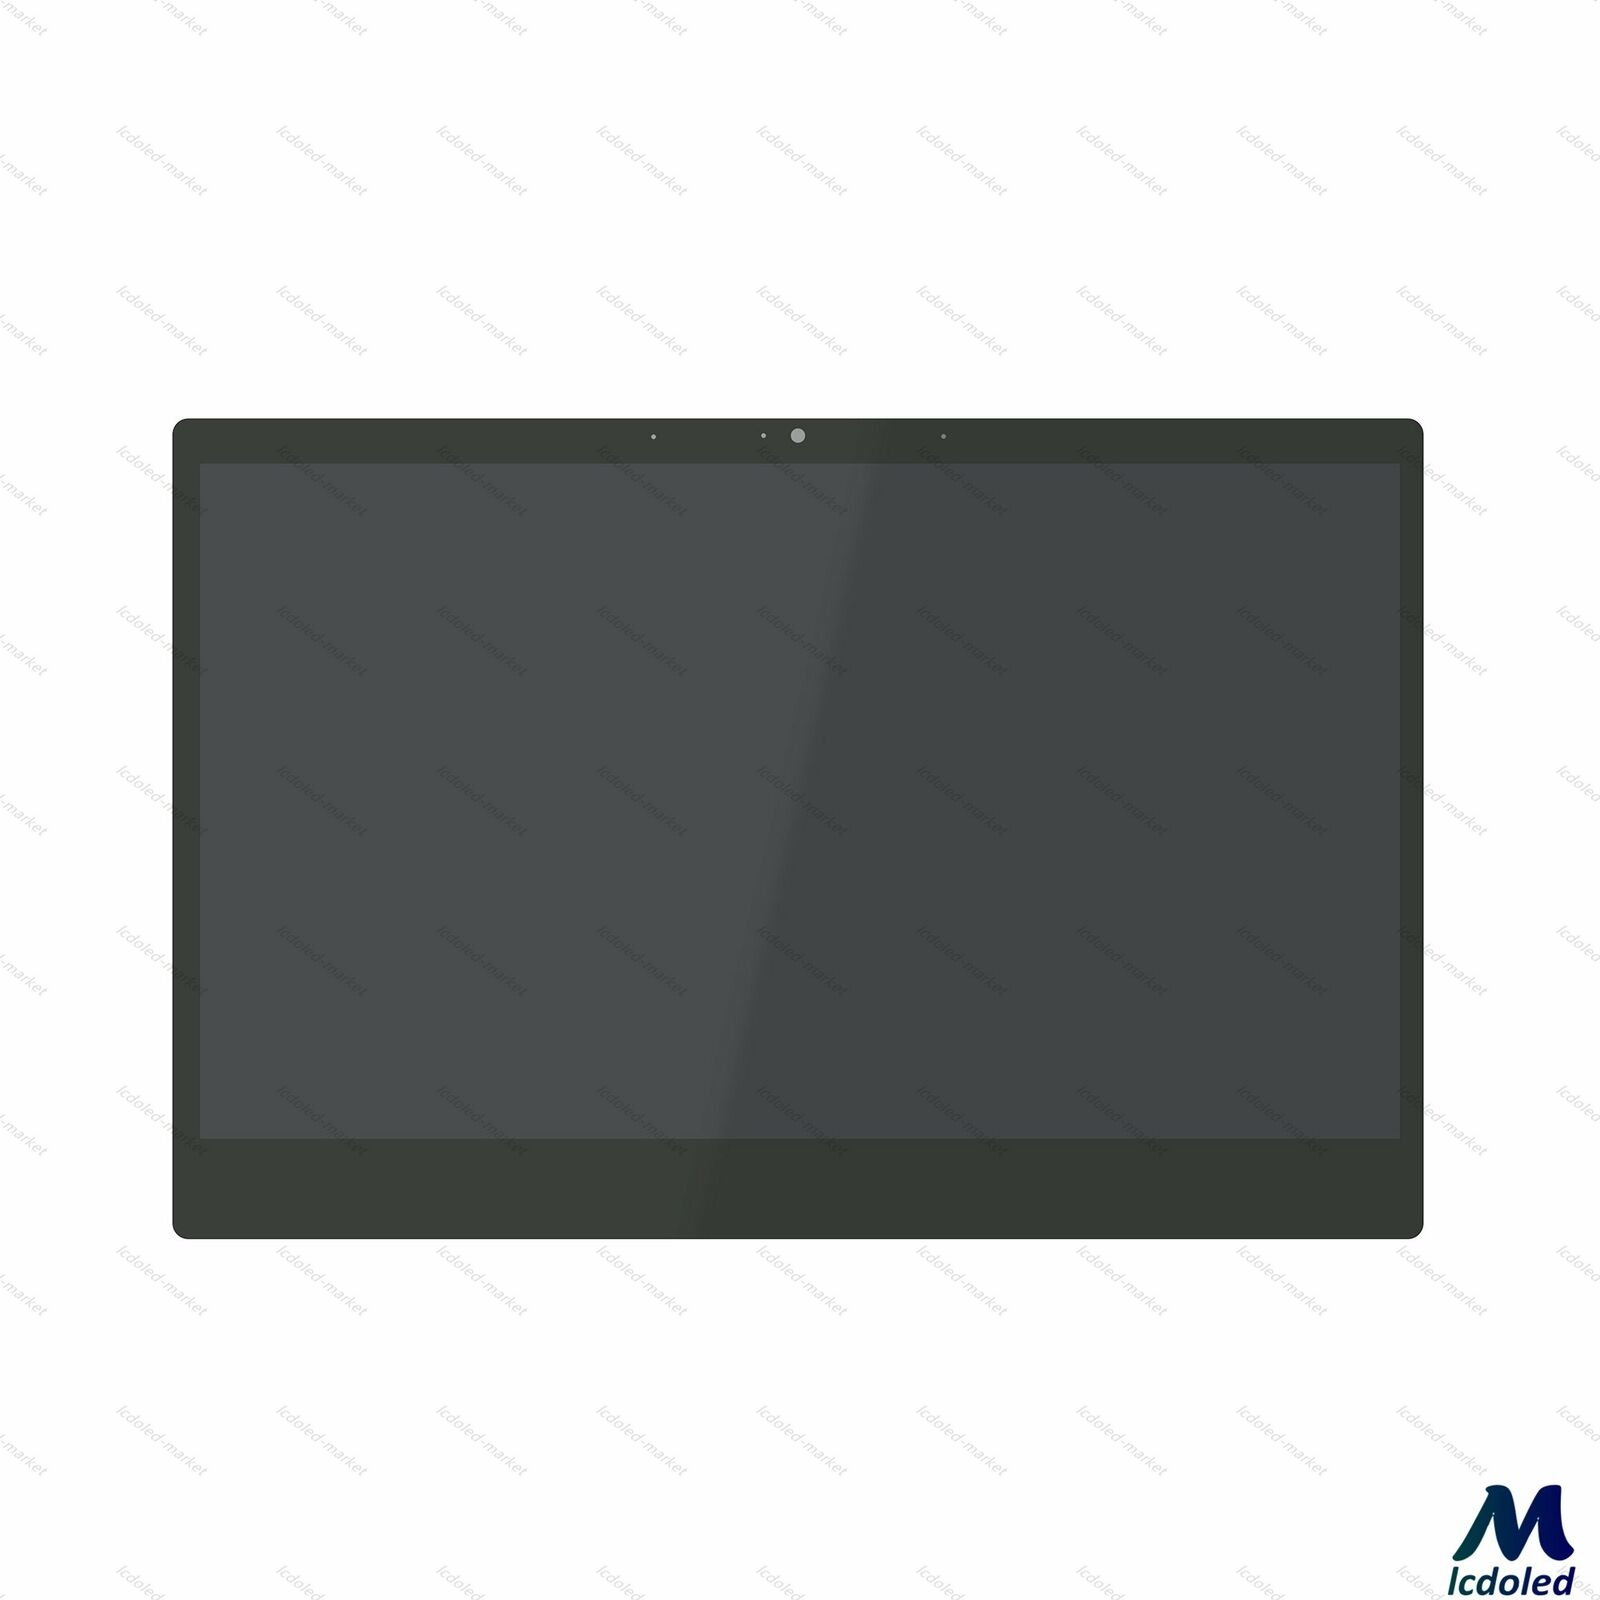 For Xiaomi Mi Notebook Air Pro 12.5 inch LCD Screen Display Glass Assembly 1080P